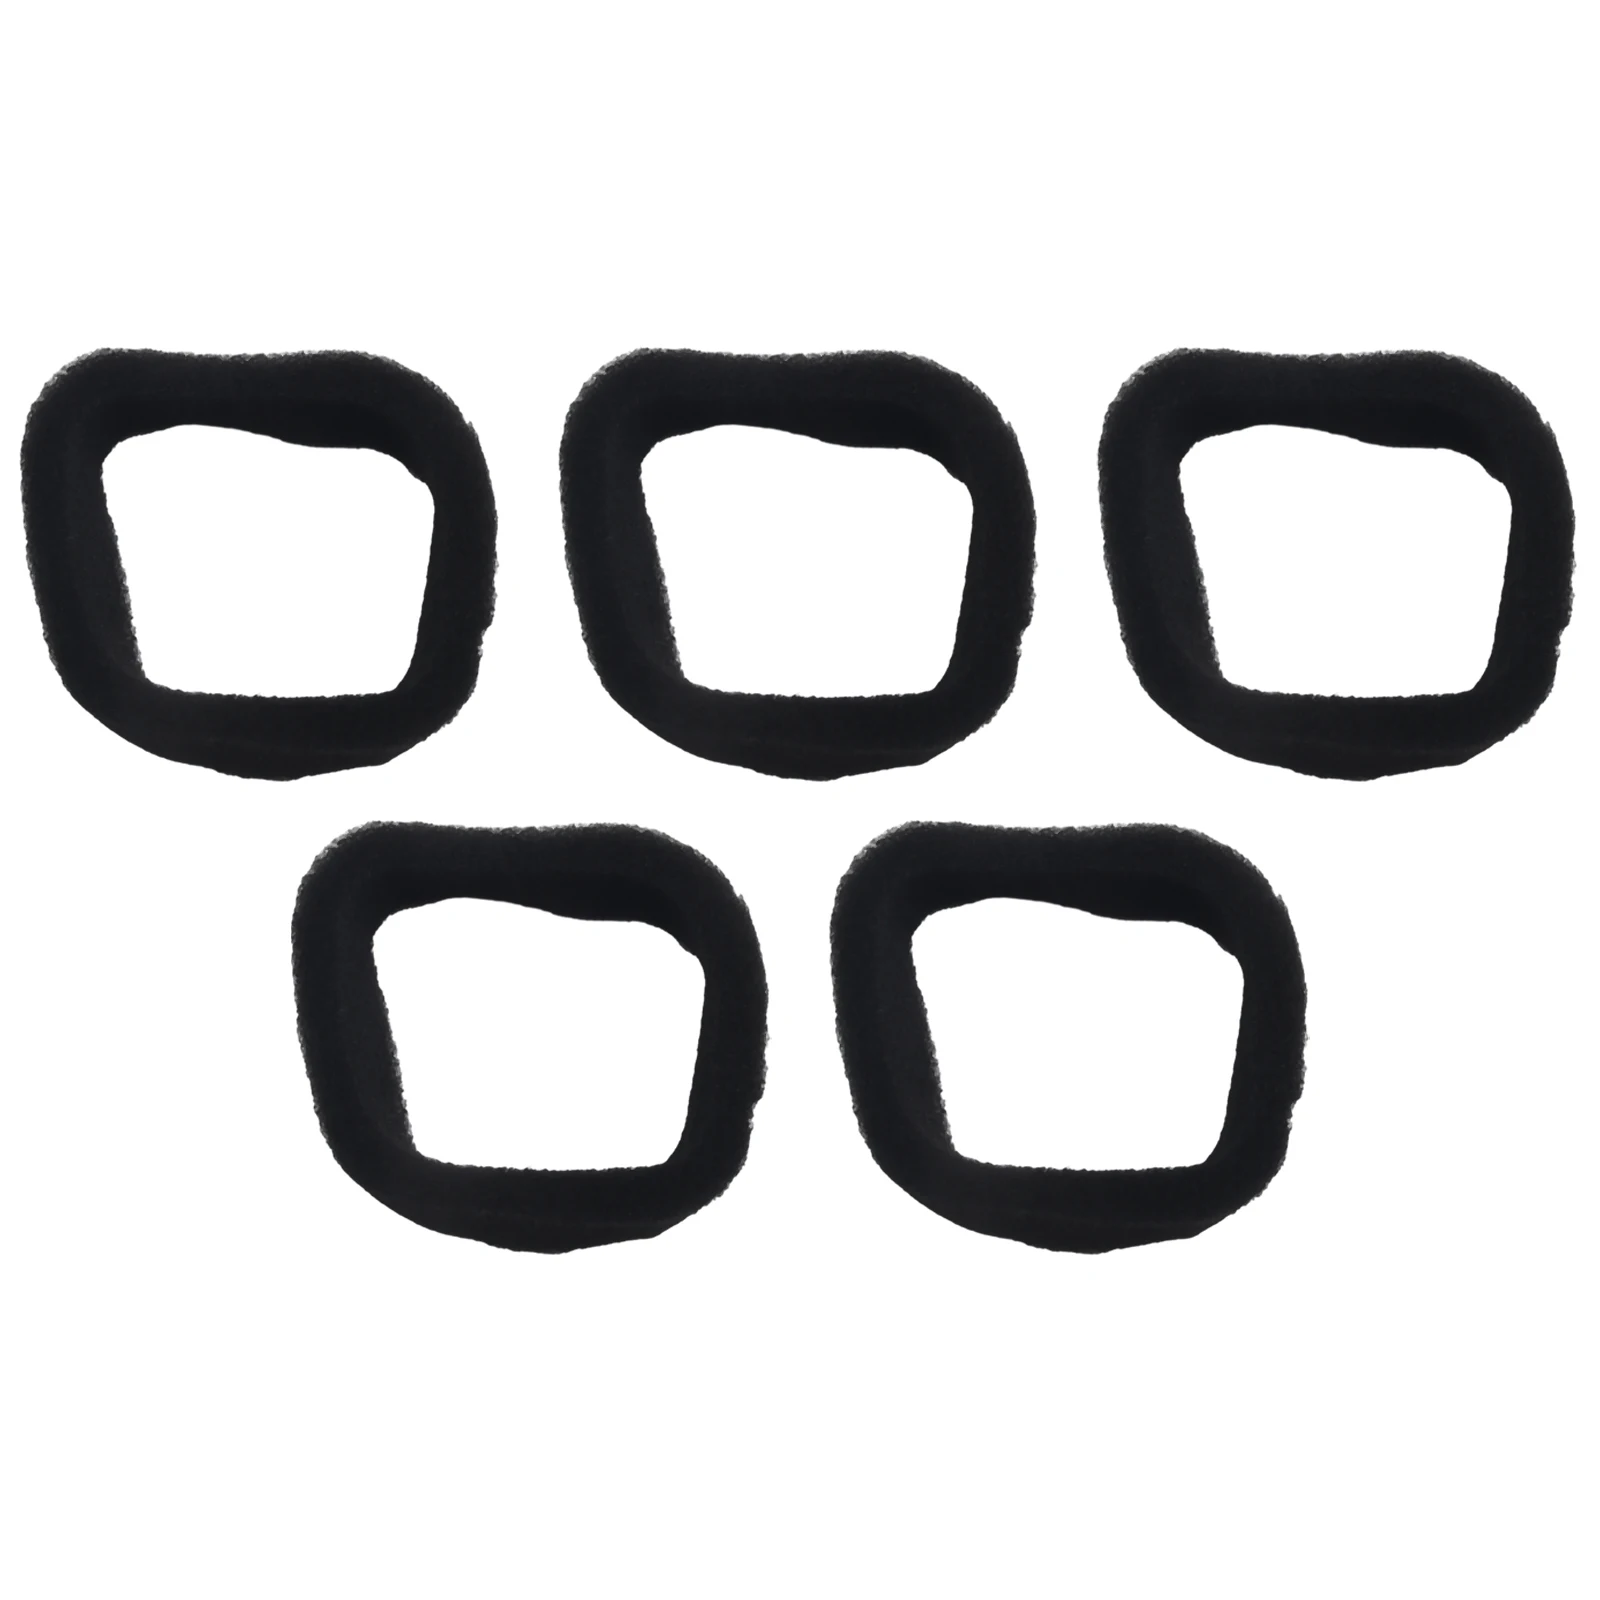 

Brand New High Quality Practical Filter Sponge Parts Fits For Various Strimmers Set Spare Sponge 50mmX43mm Accessories Black